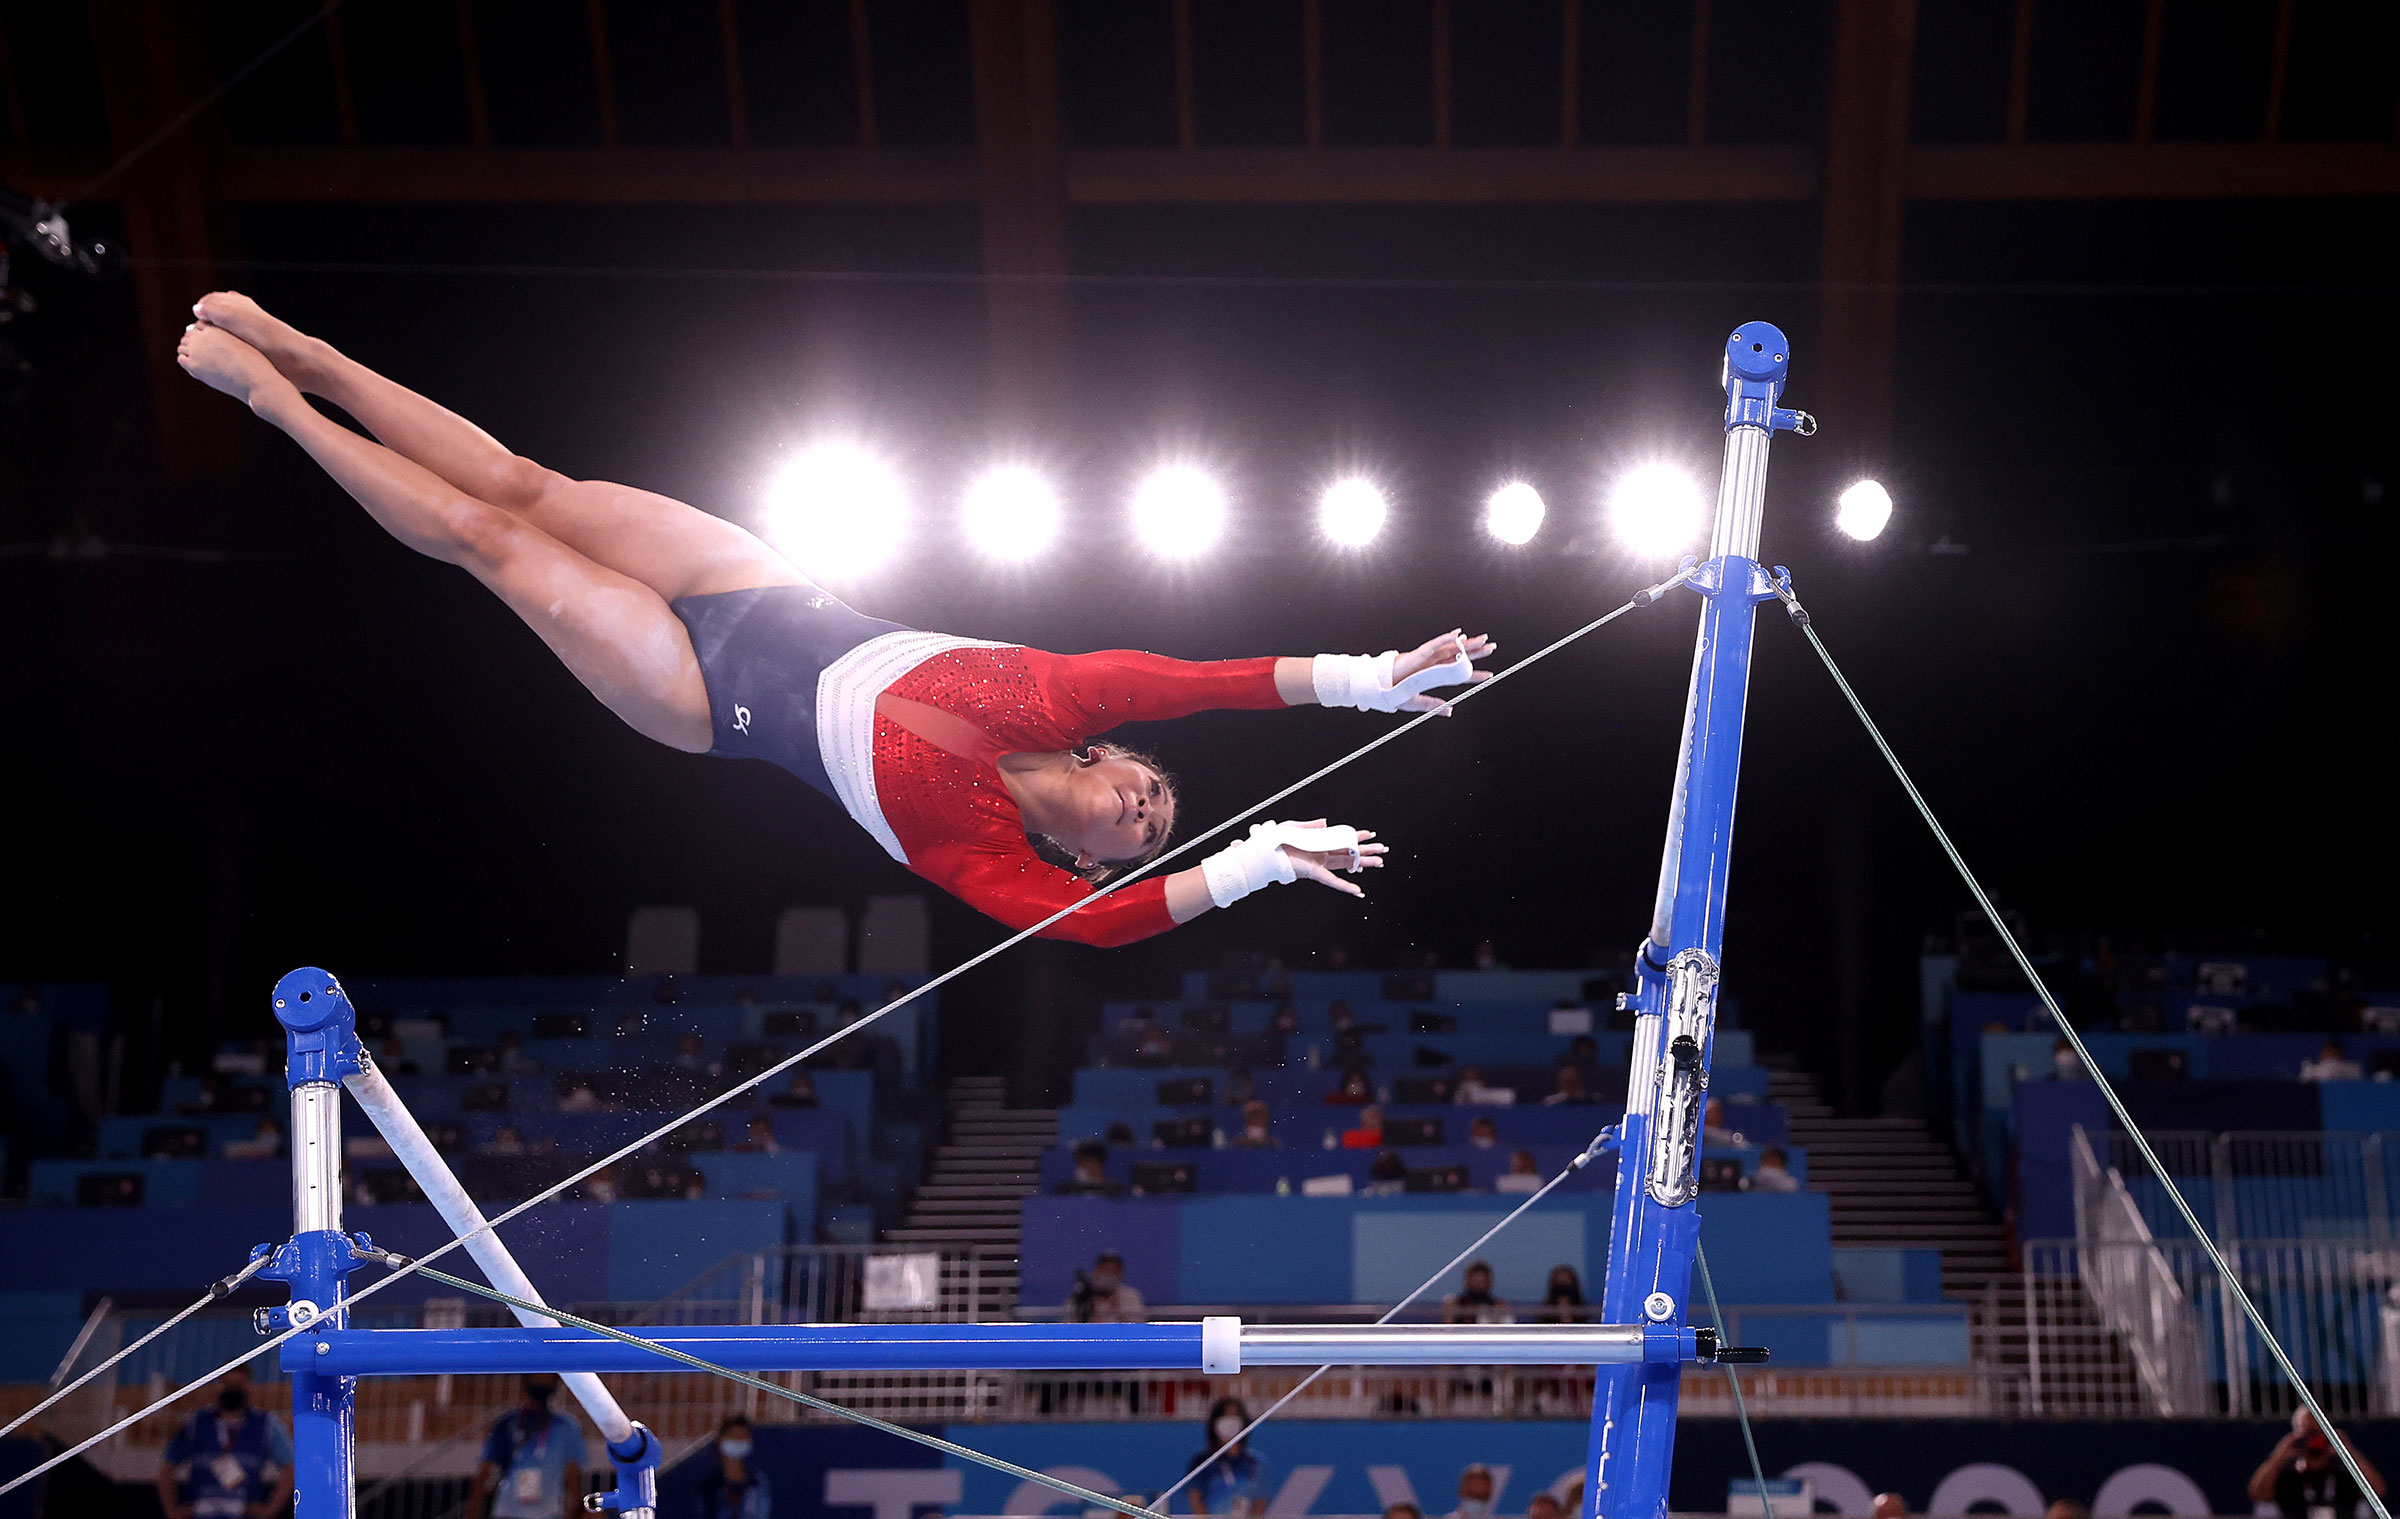 Sunisa Lee of Team United States competes in the uneven bars during the Women's Team Final of the Tokyo 2020 Olympic Games on July 27, 2021.